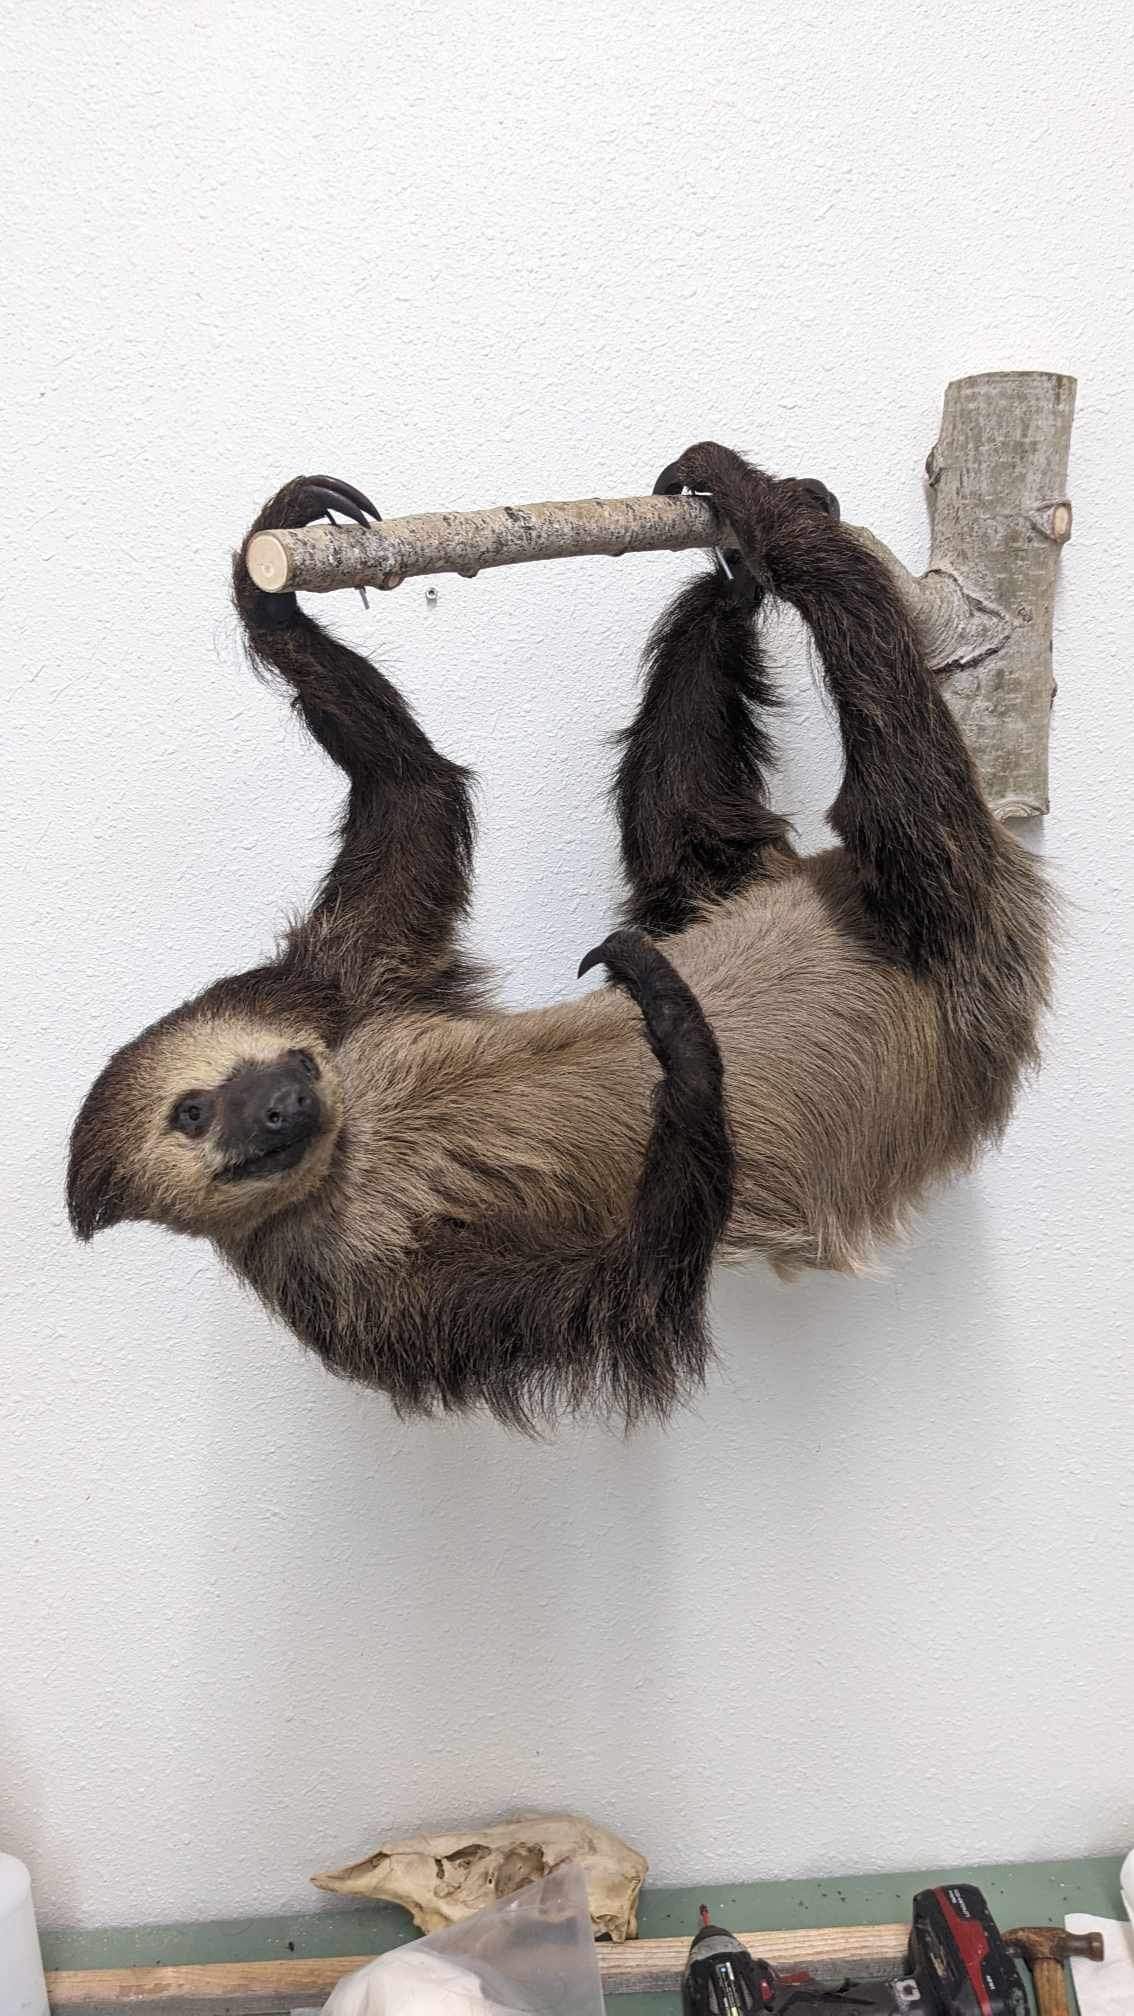 New Excellent Adult Sloth Taxidermy Wall Mount Full Body